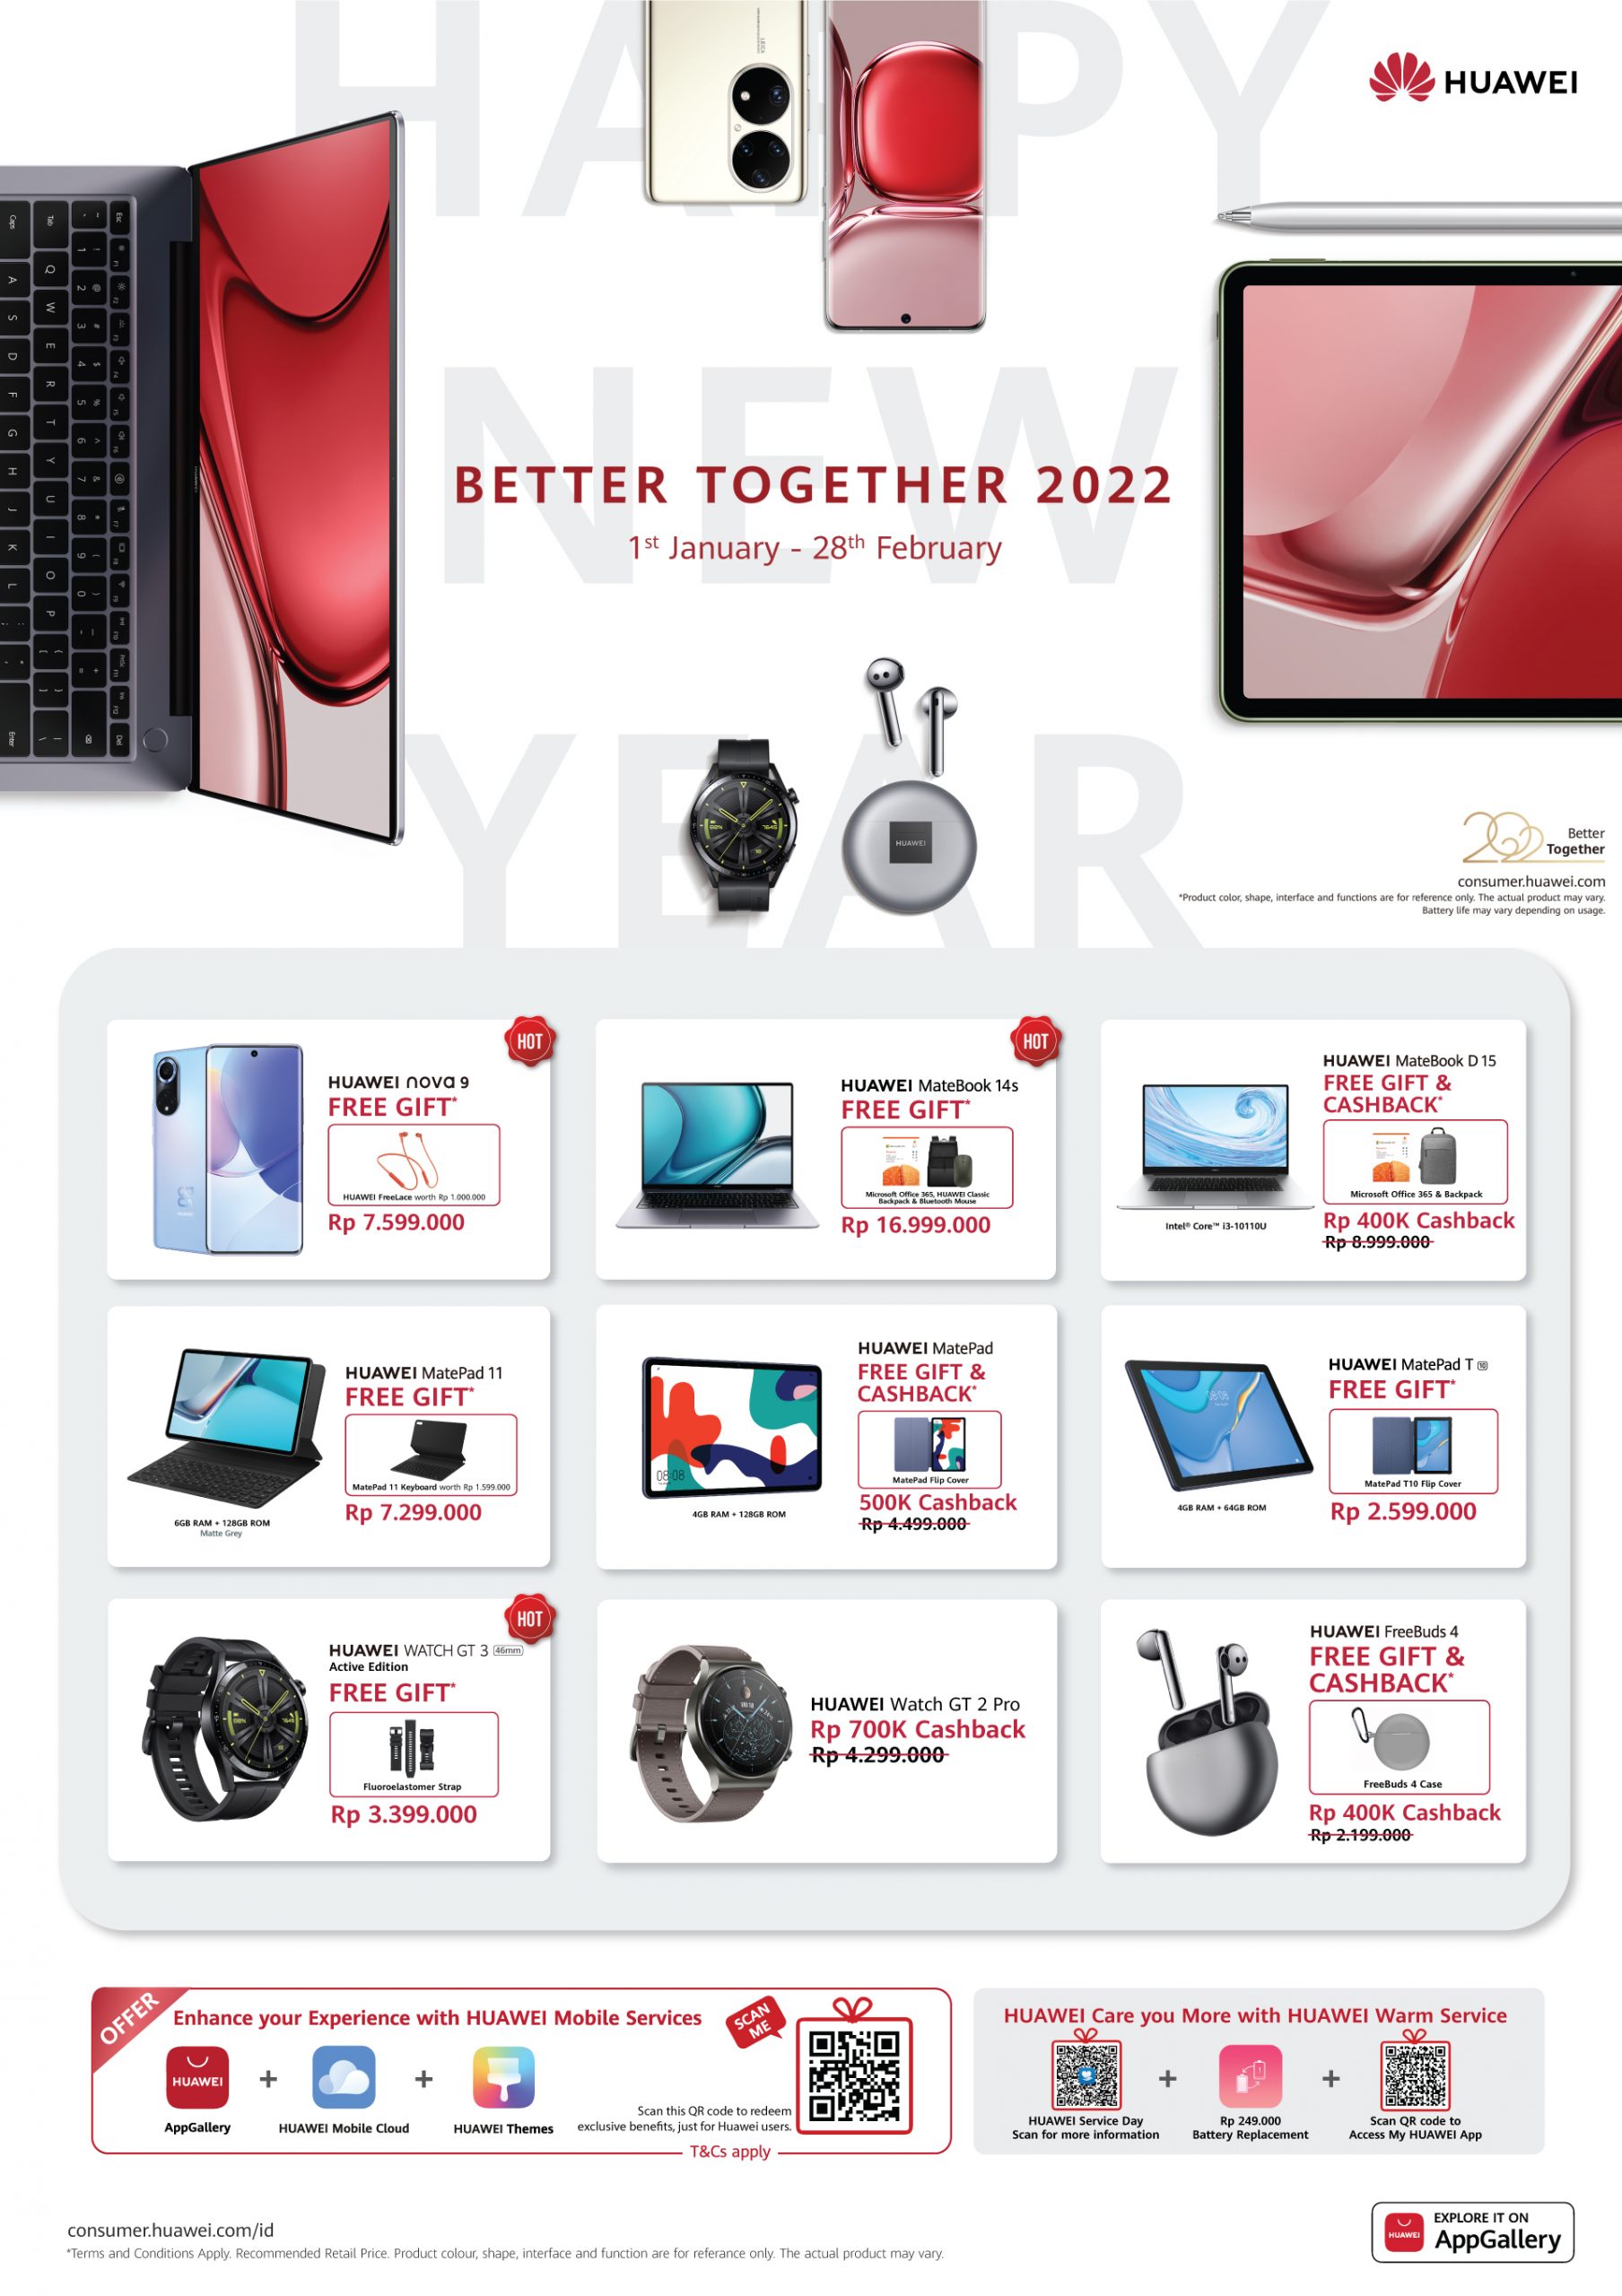 promo huawei Better Together